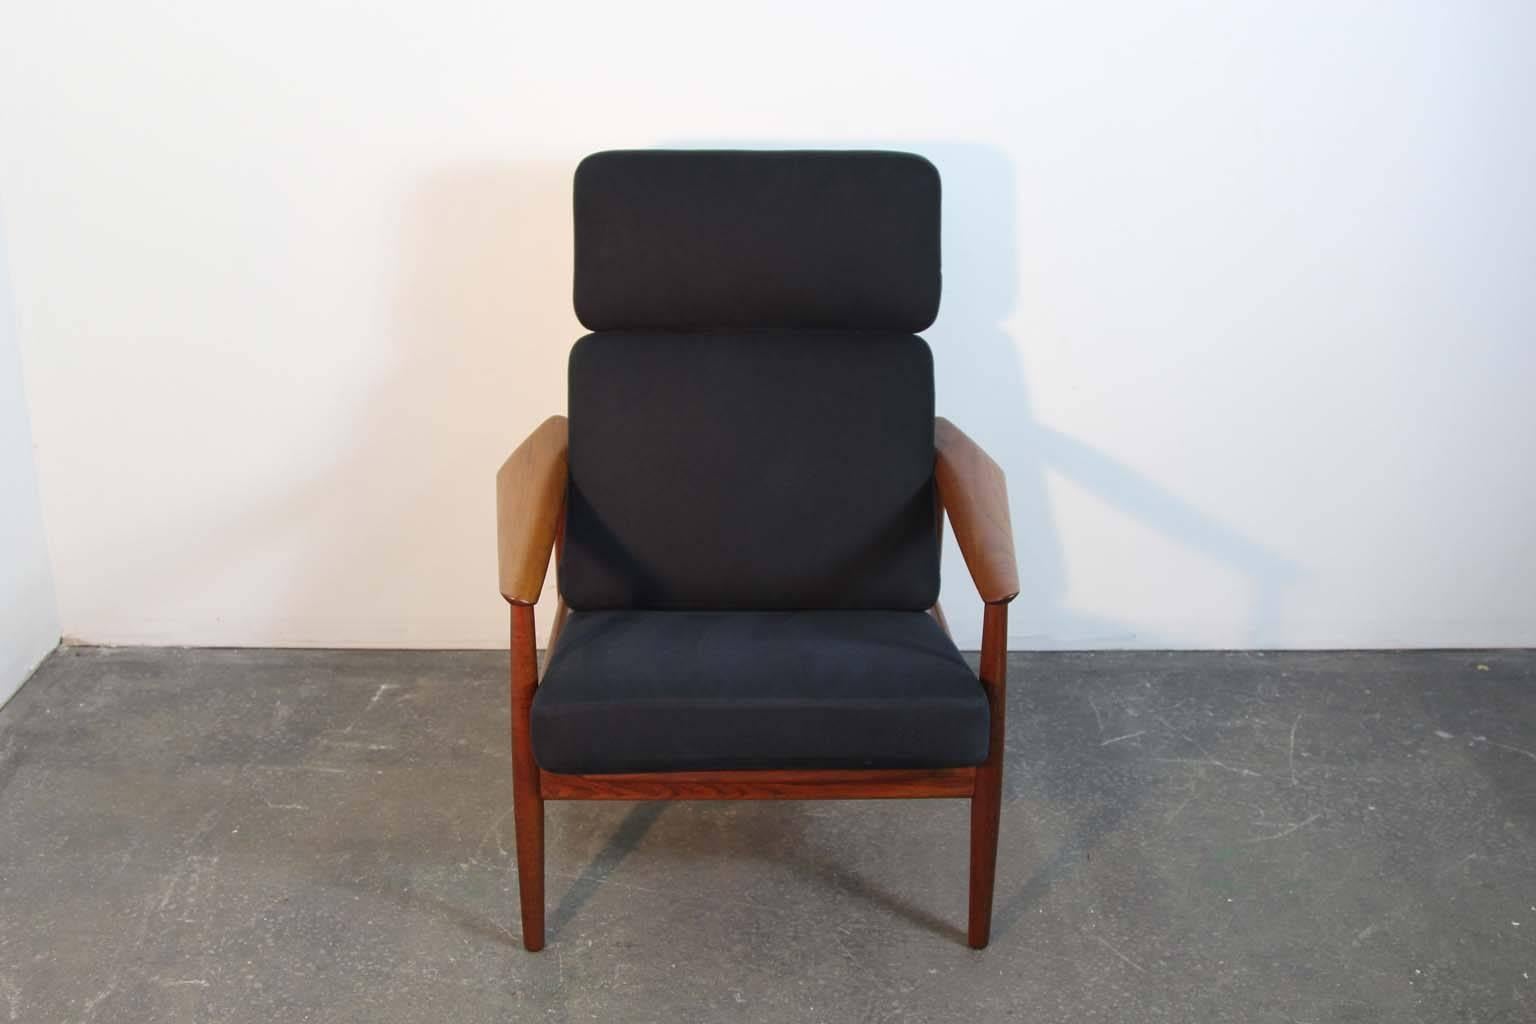 Vintage Arne Vodder high back teak lounge chair, reclinable in three positions. Refinished solid teakwood frame. Original seat loop springs in good condition showing minor wear. Original black fabric upholstery in excellent condition with little to